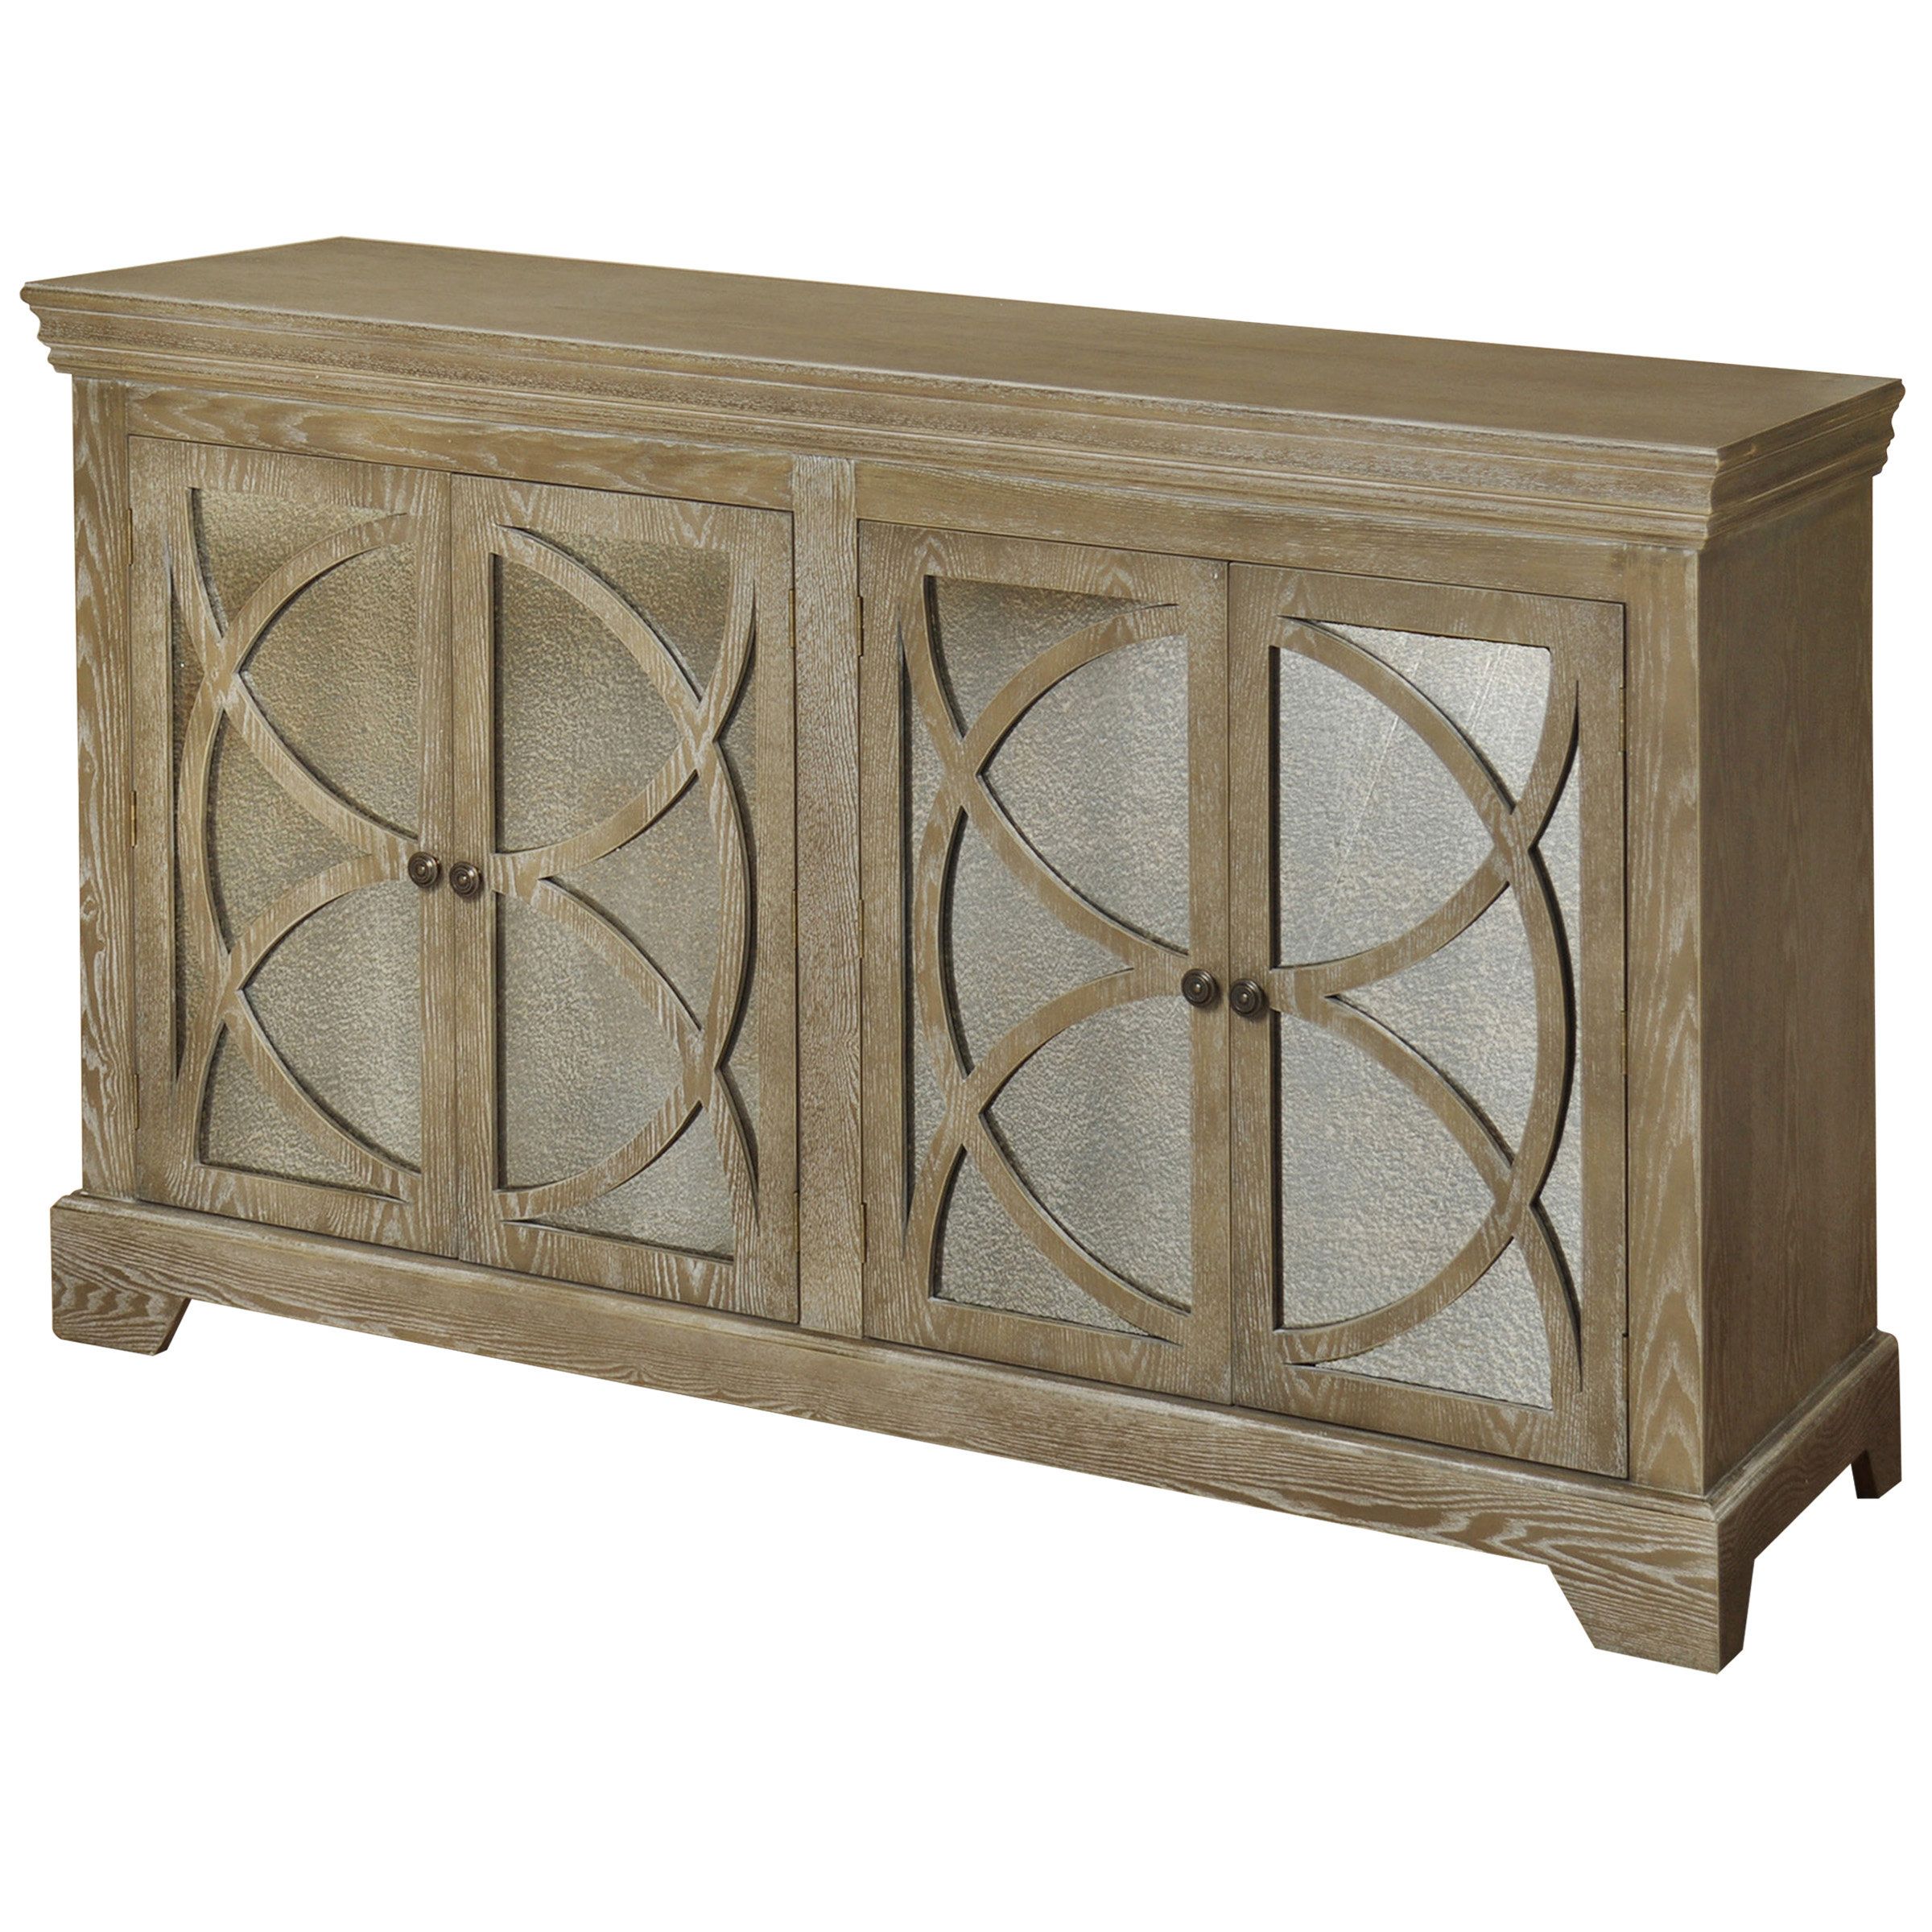 60 Inch Credenza | Wayfair In Most Current Caines Credenzas (View 17 of 20)